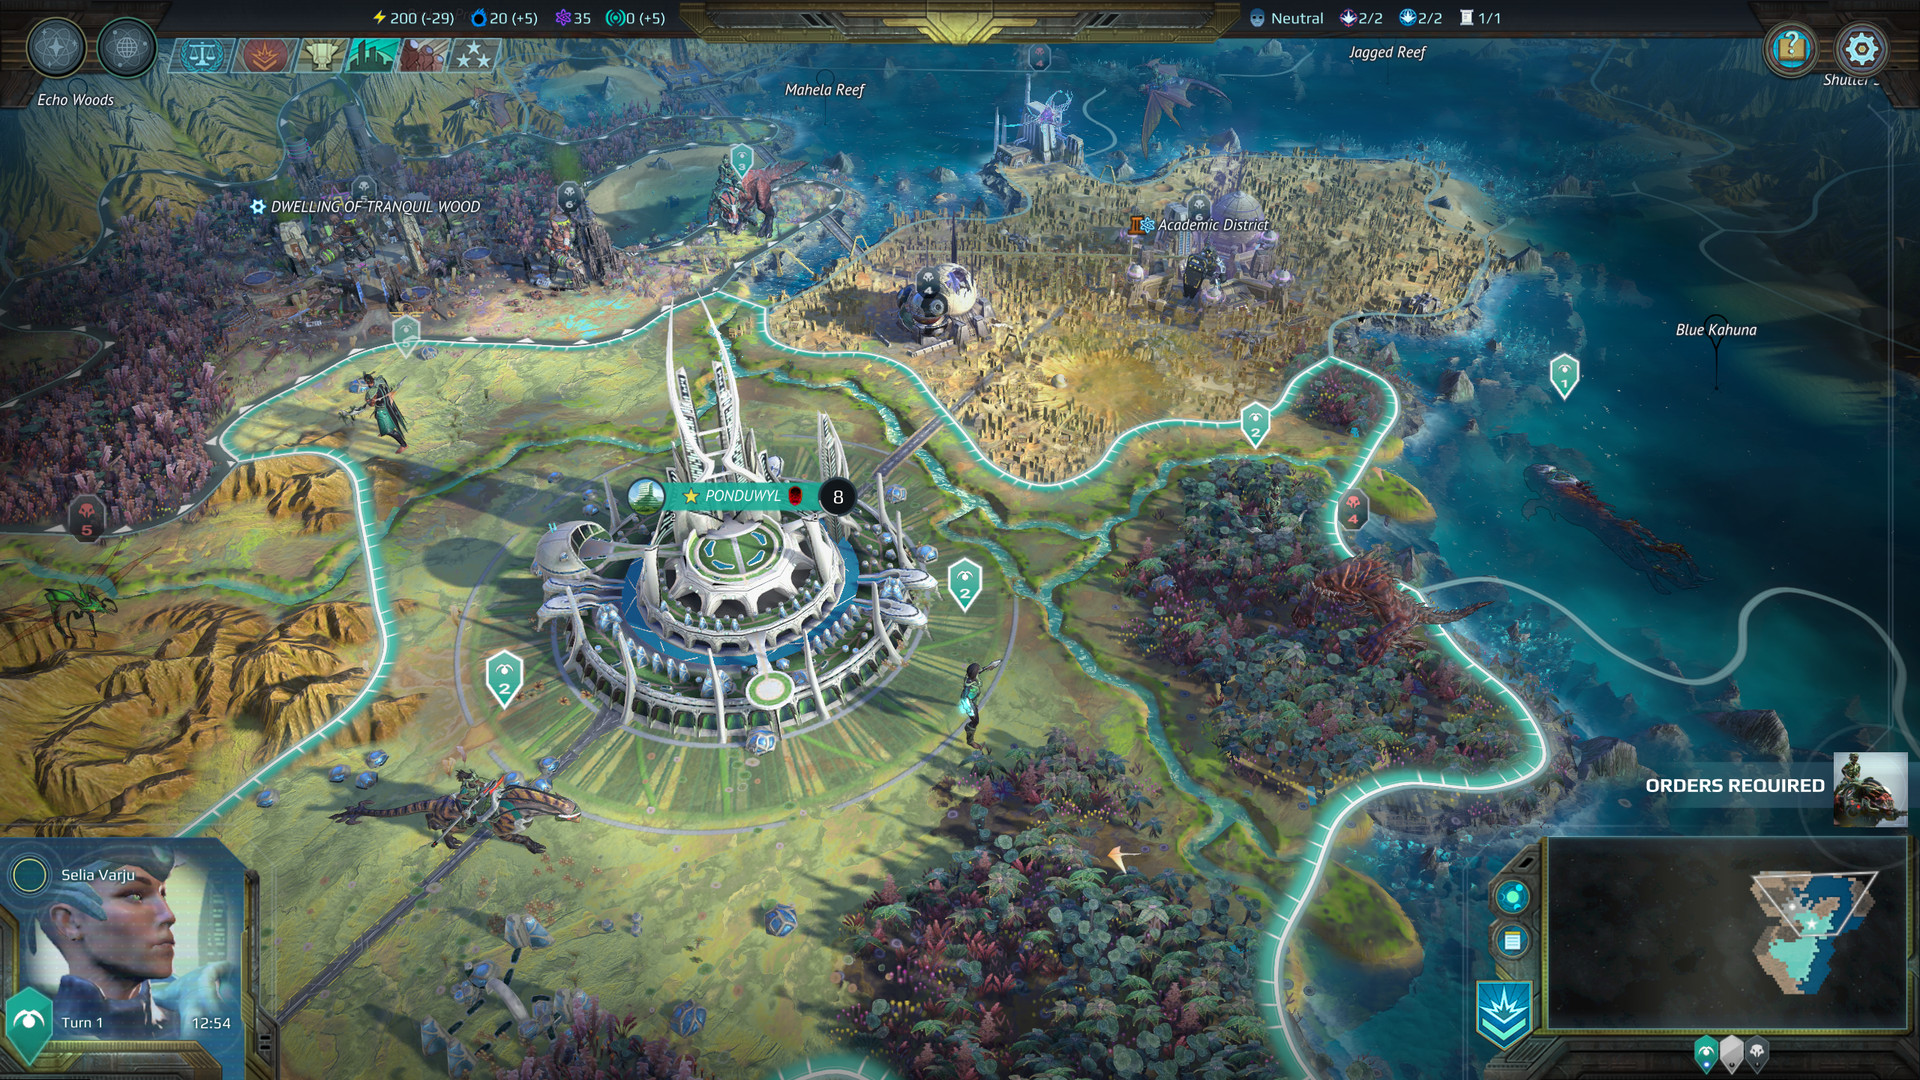 age of wonders planetfall deluxe edition